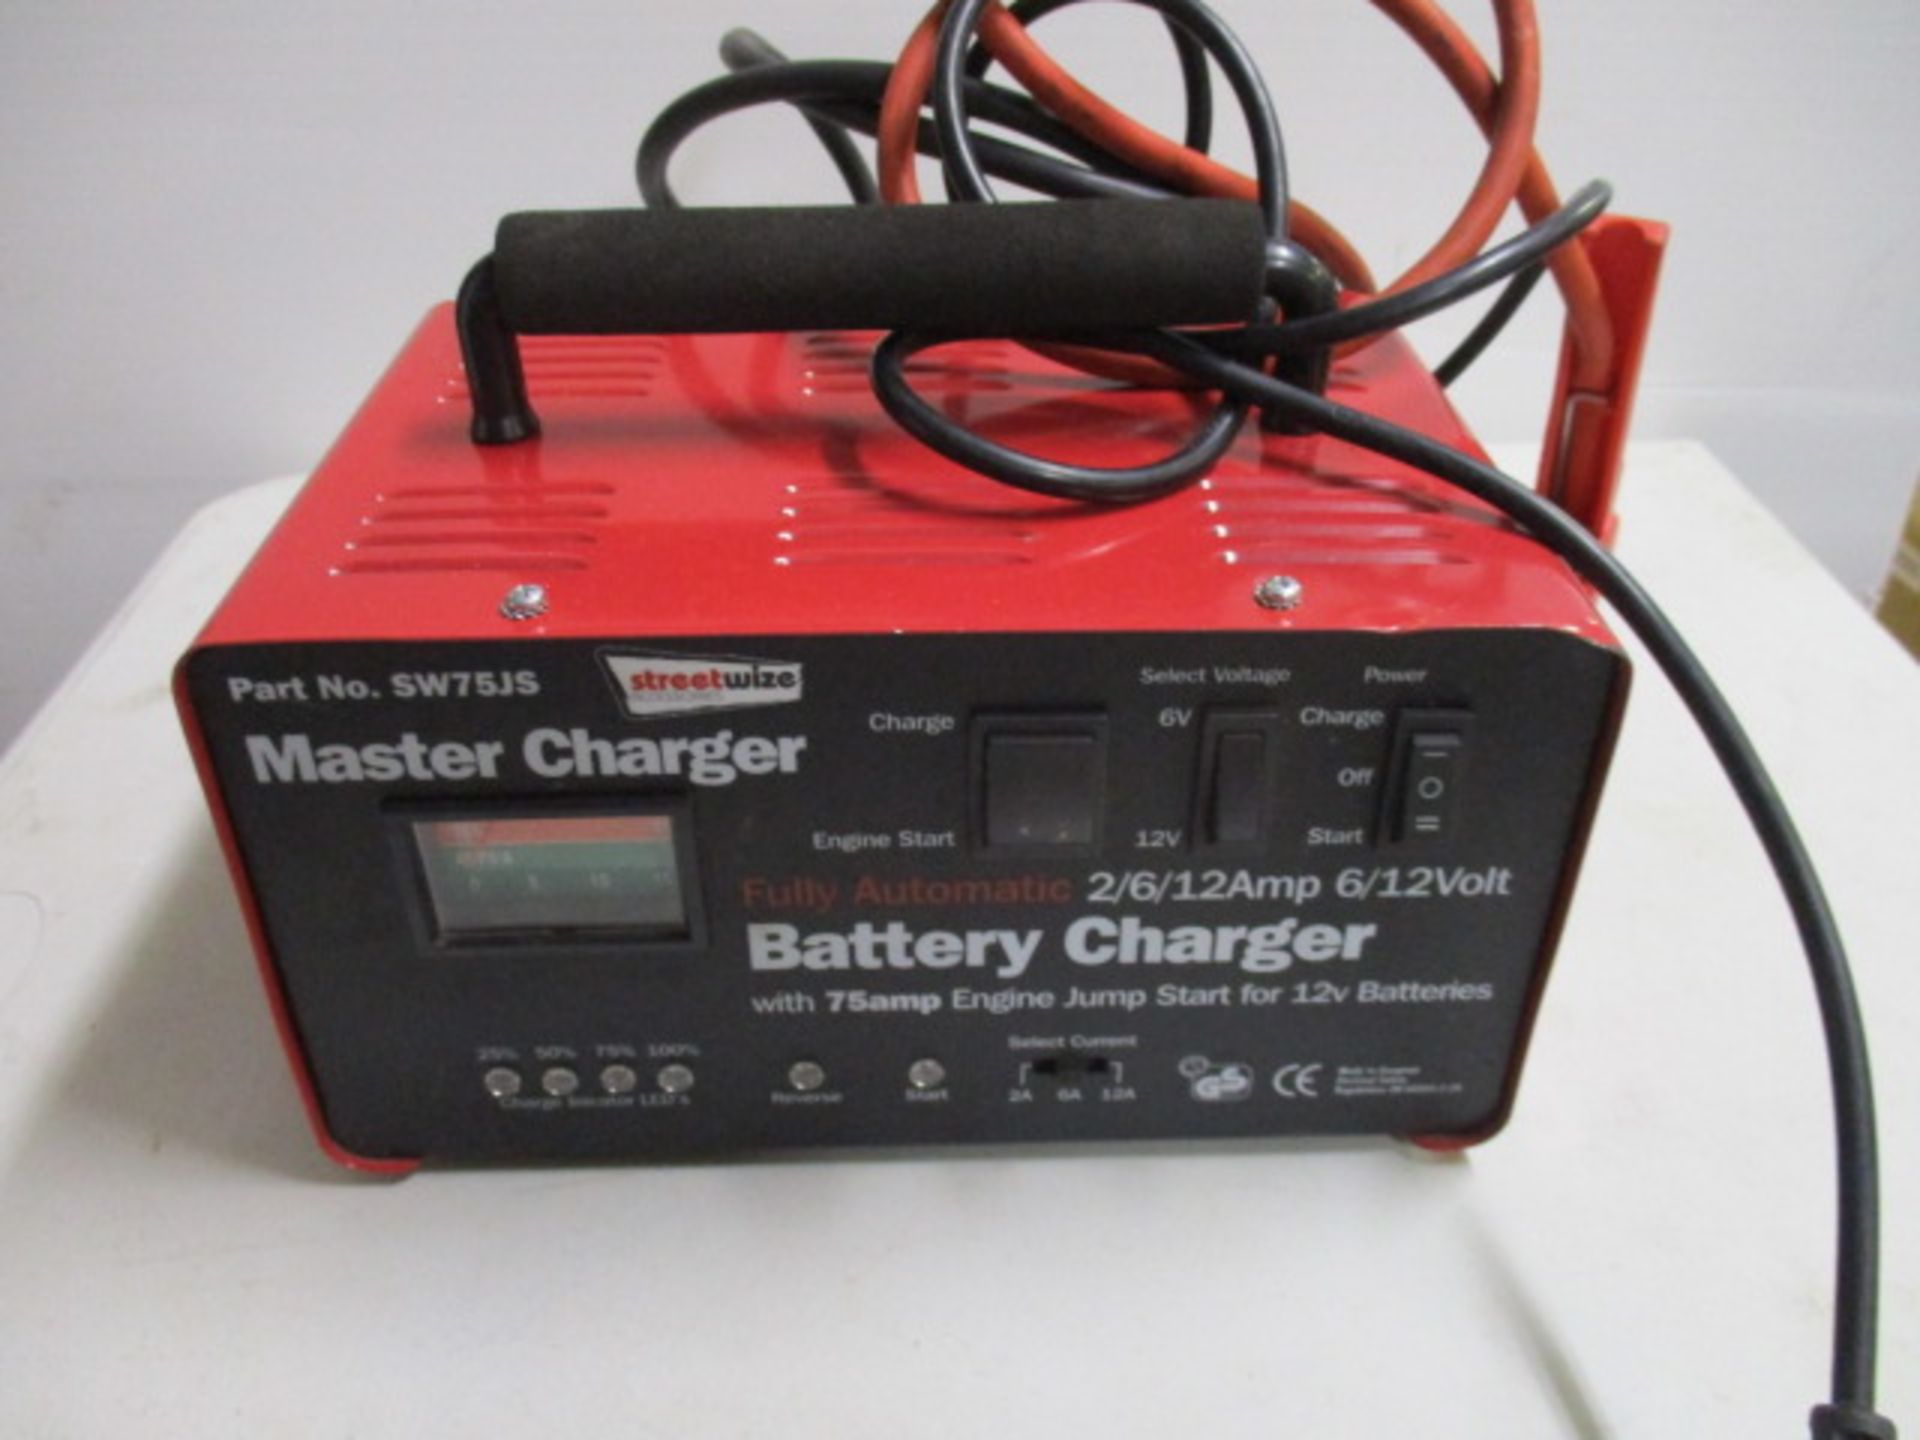 Streetwize SW75JS fully automatic 2/6/12amp 6/12V battery charger with 75amp jump start used